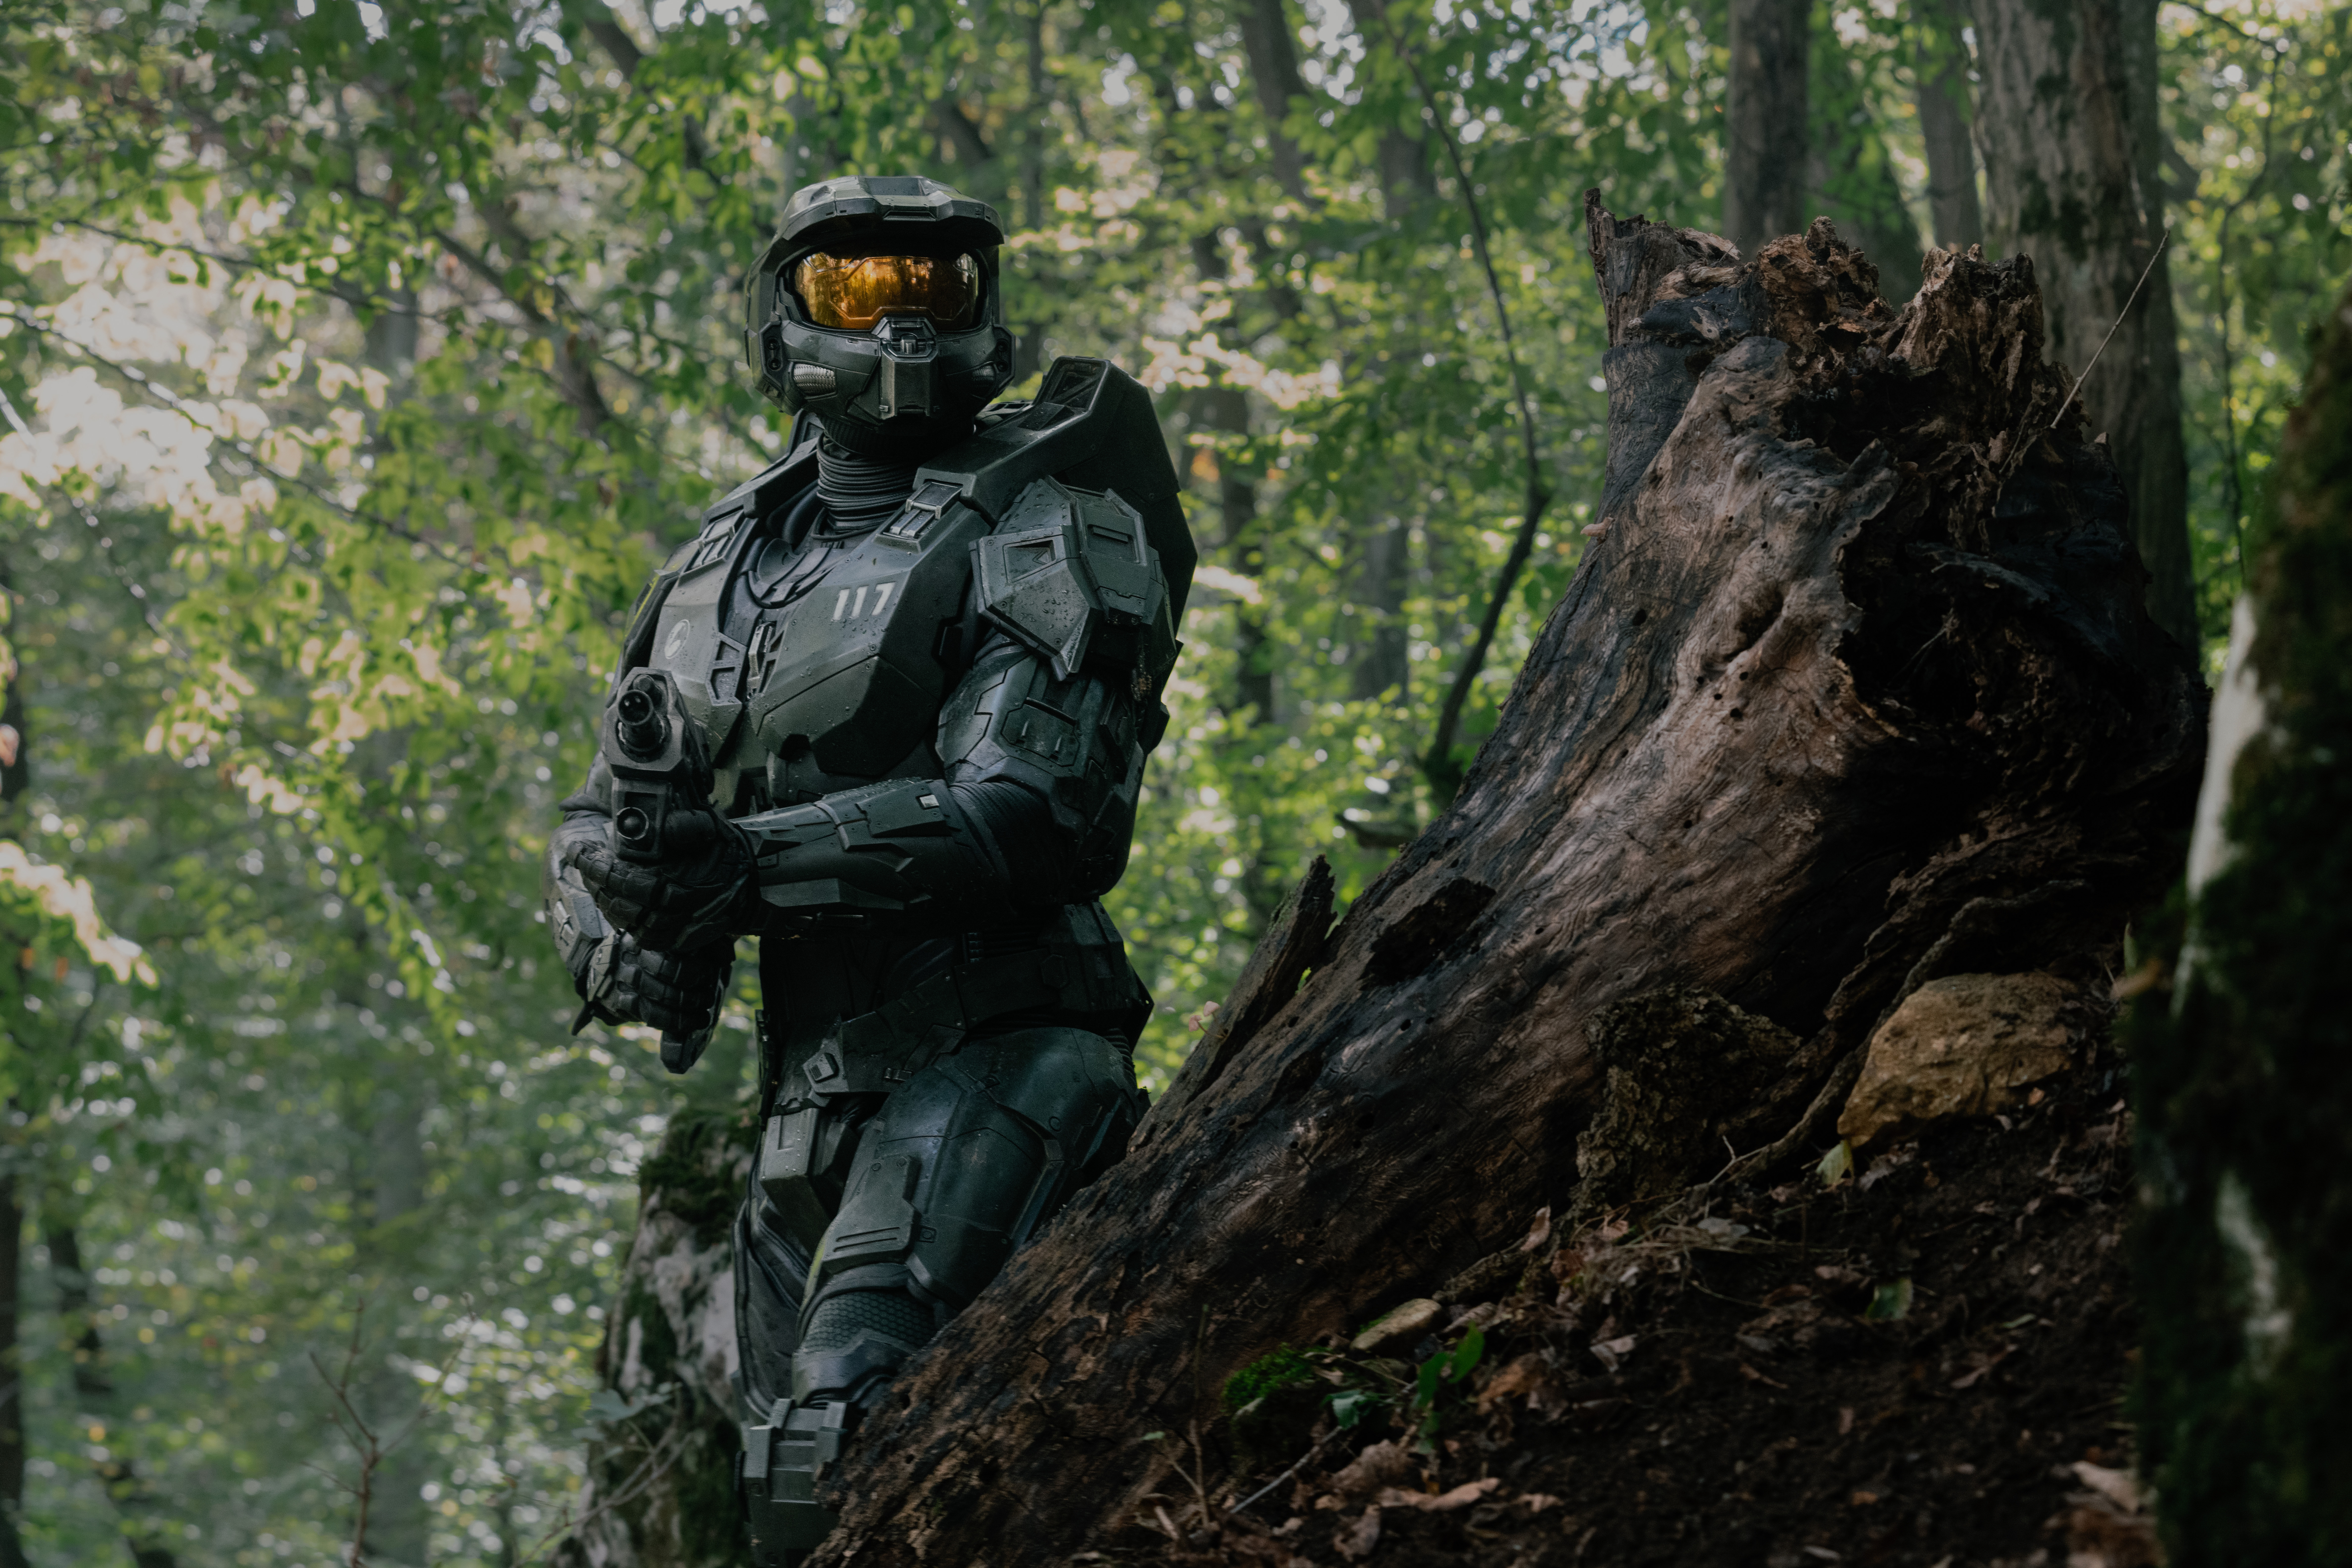 Pablo Schreiber in the Master Chief armor holding an assault rifle and walking through the woods with a tree stump in front of him in Halo season 2 